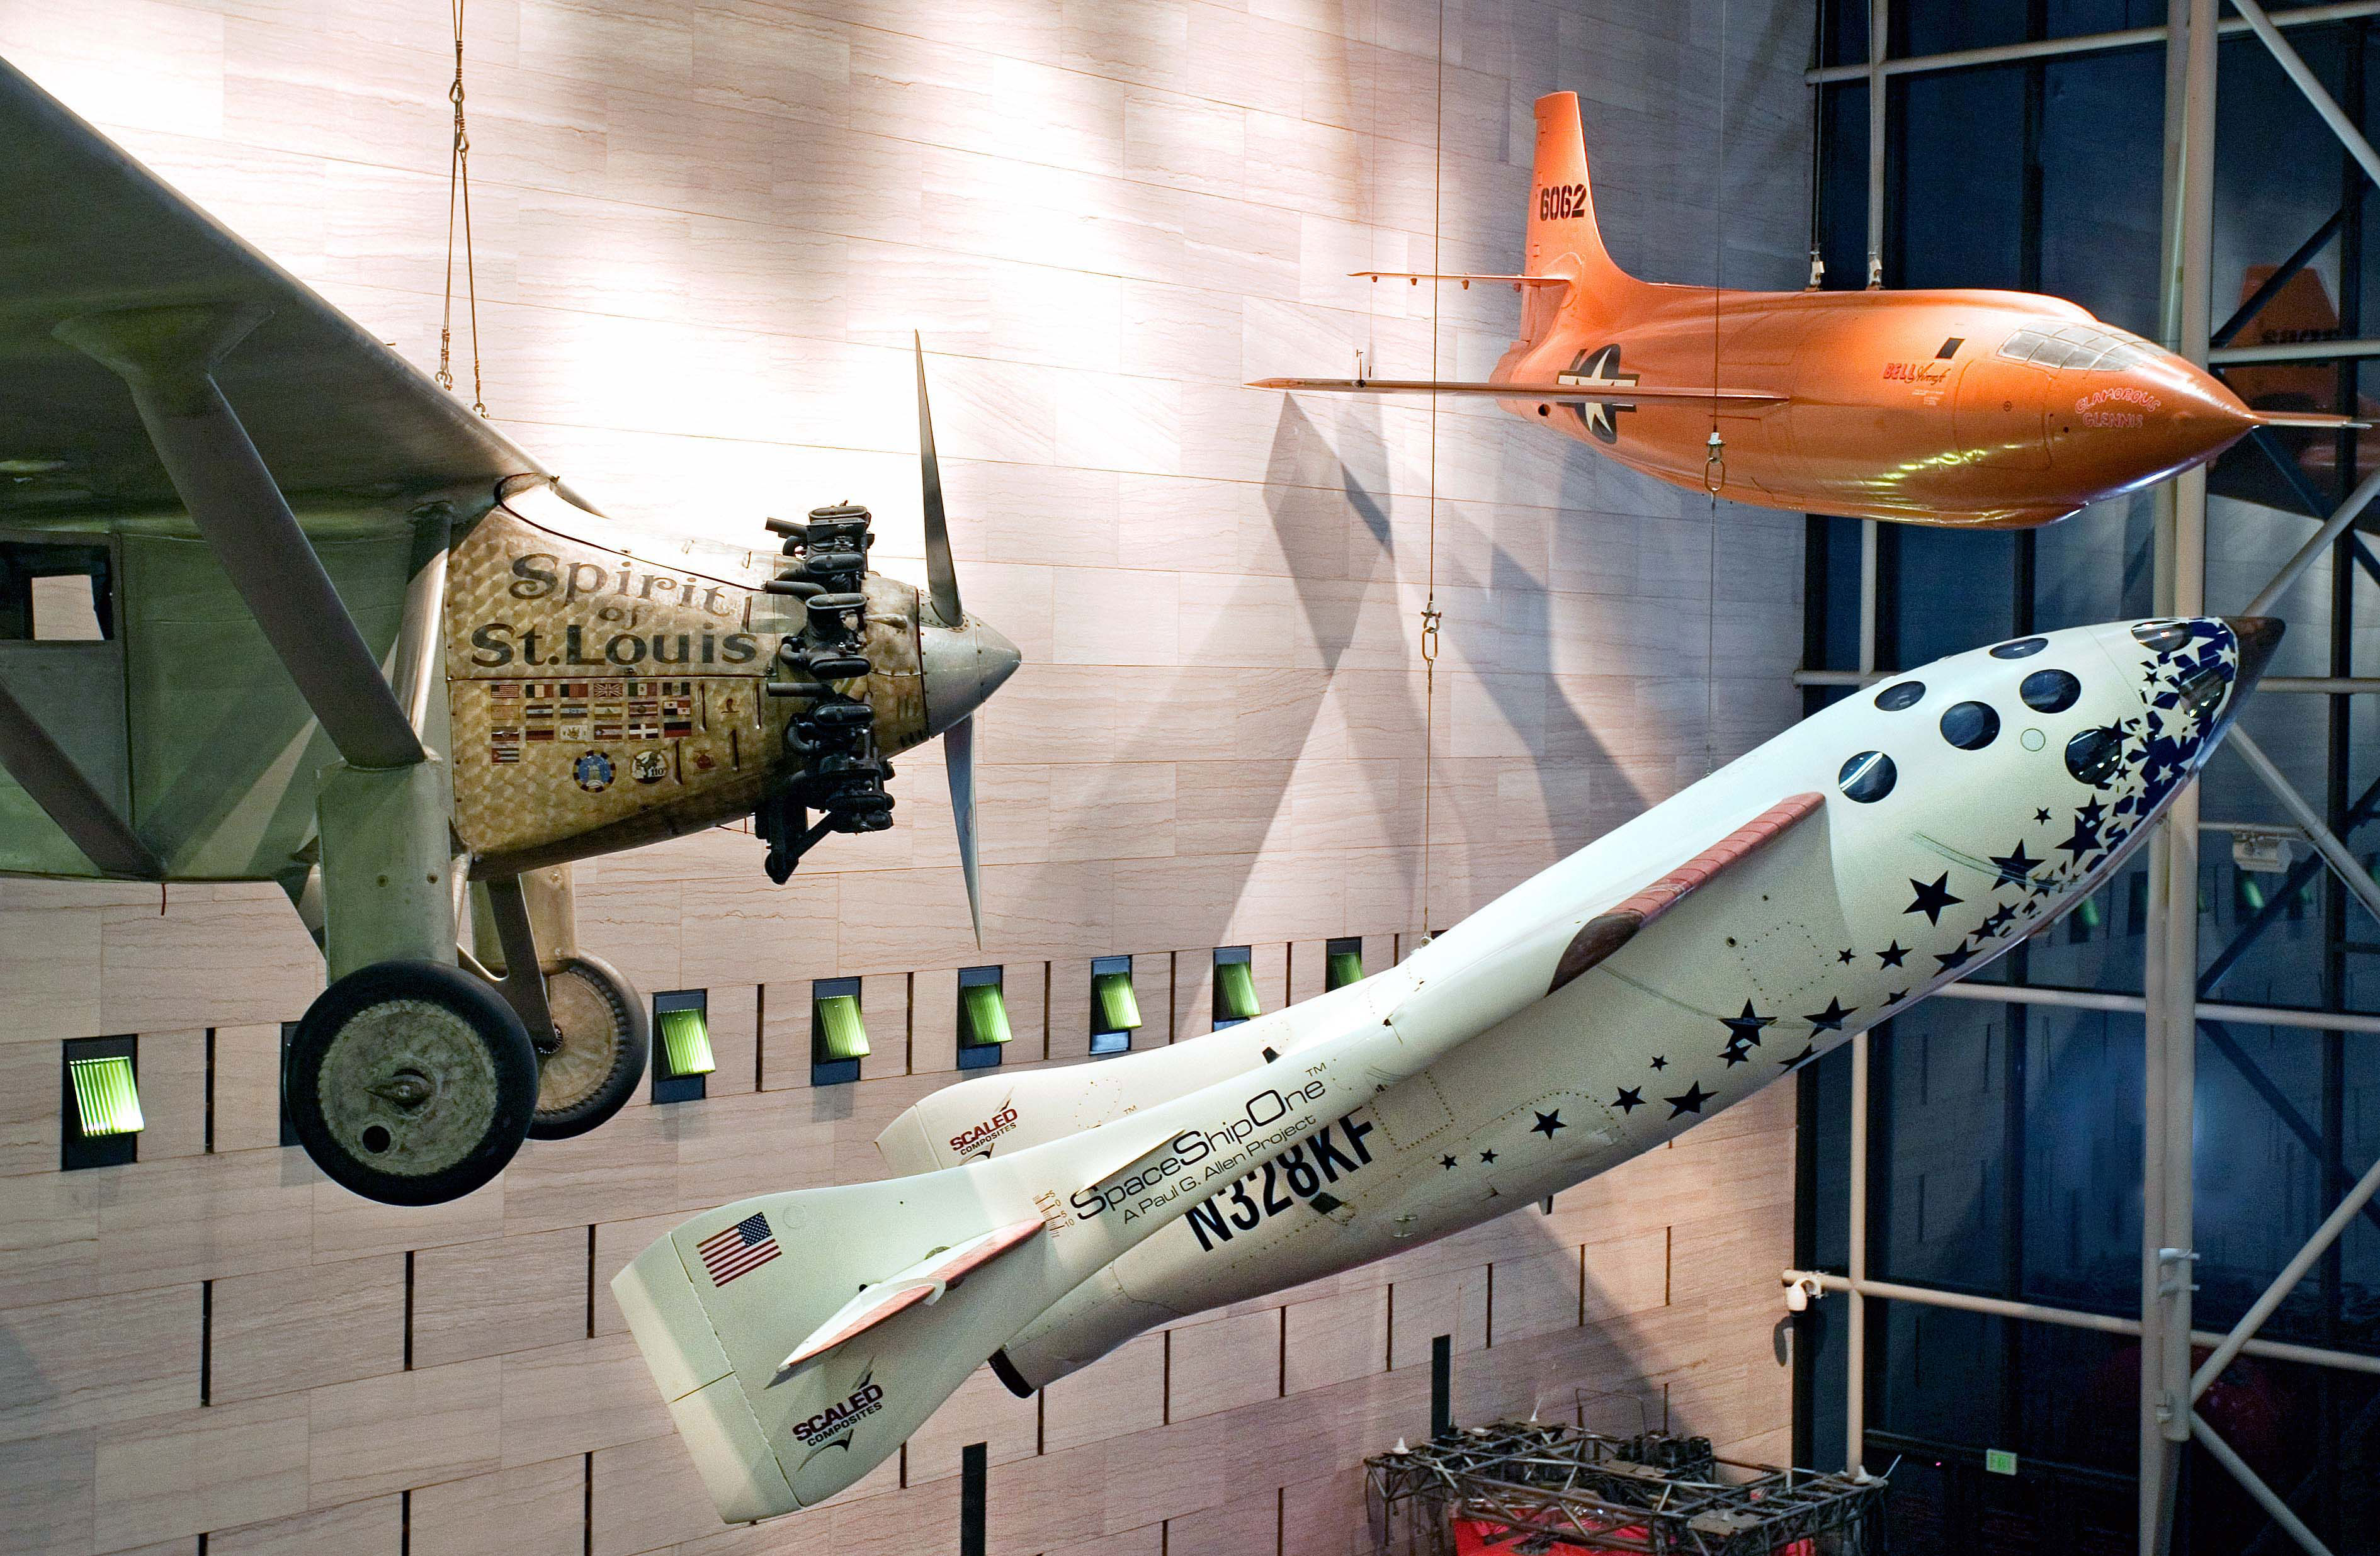 Aviation Treasures: Spirit of St. Louis, SpaceShipOne and the Bell X-1. Credit: Eric Long/NASM Smithsonian Institution